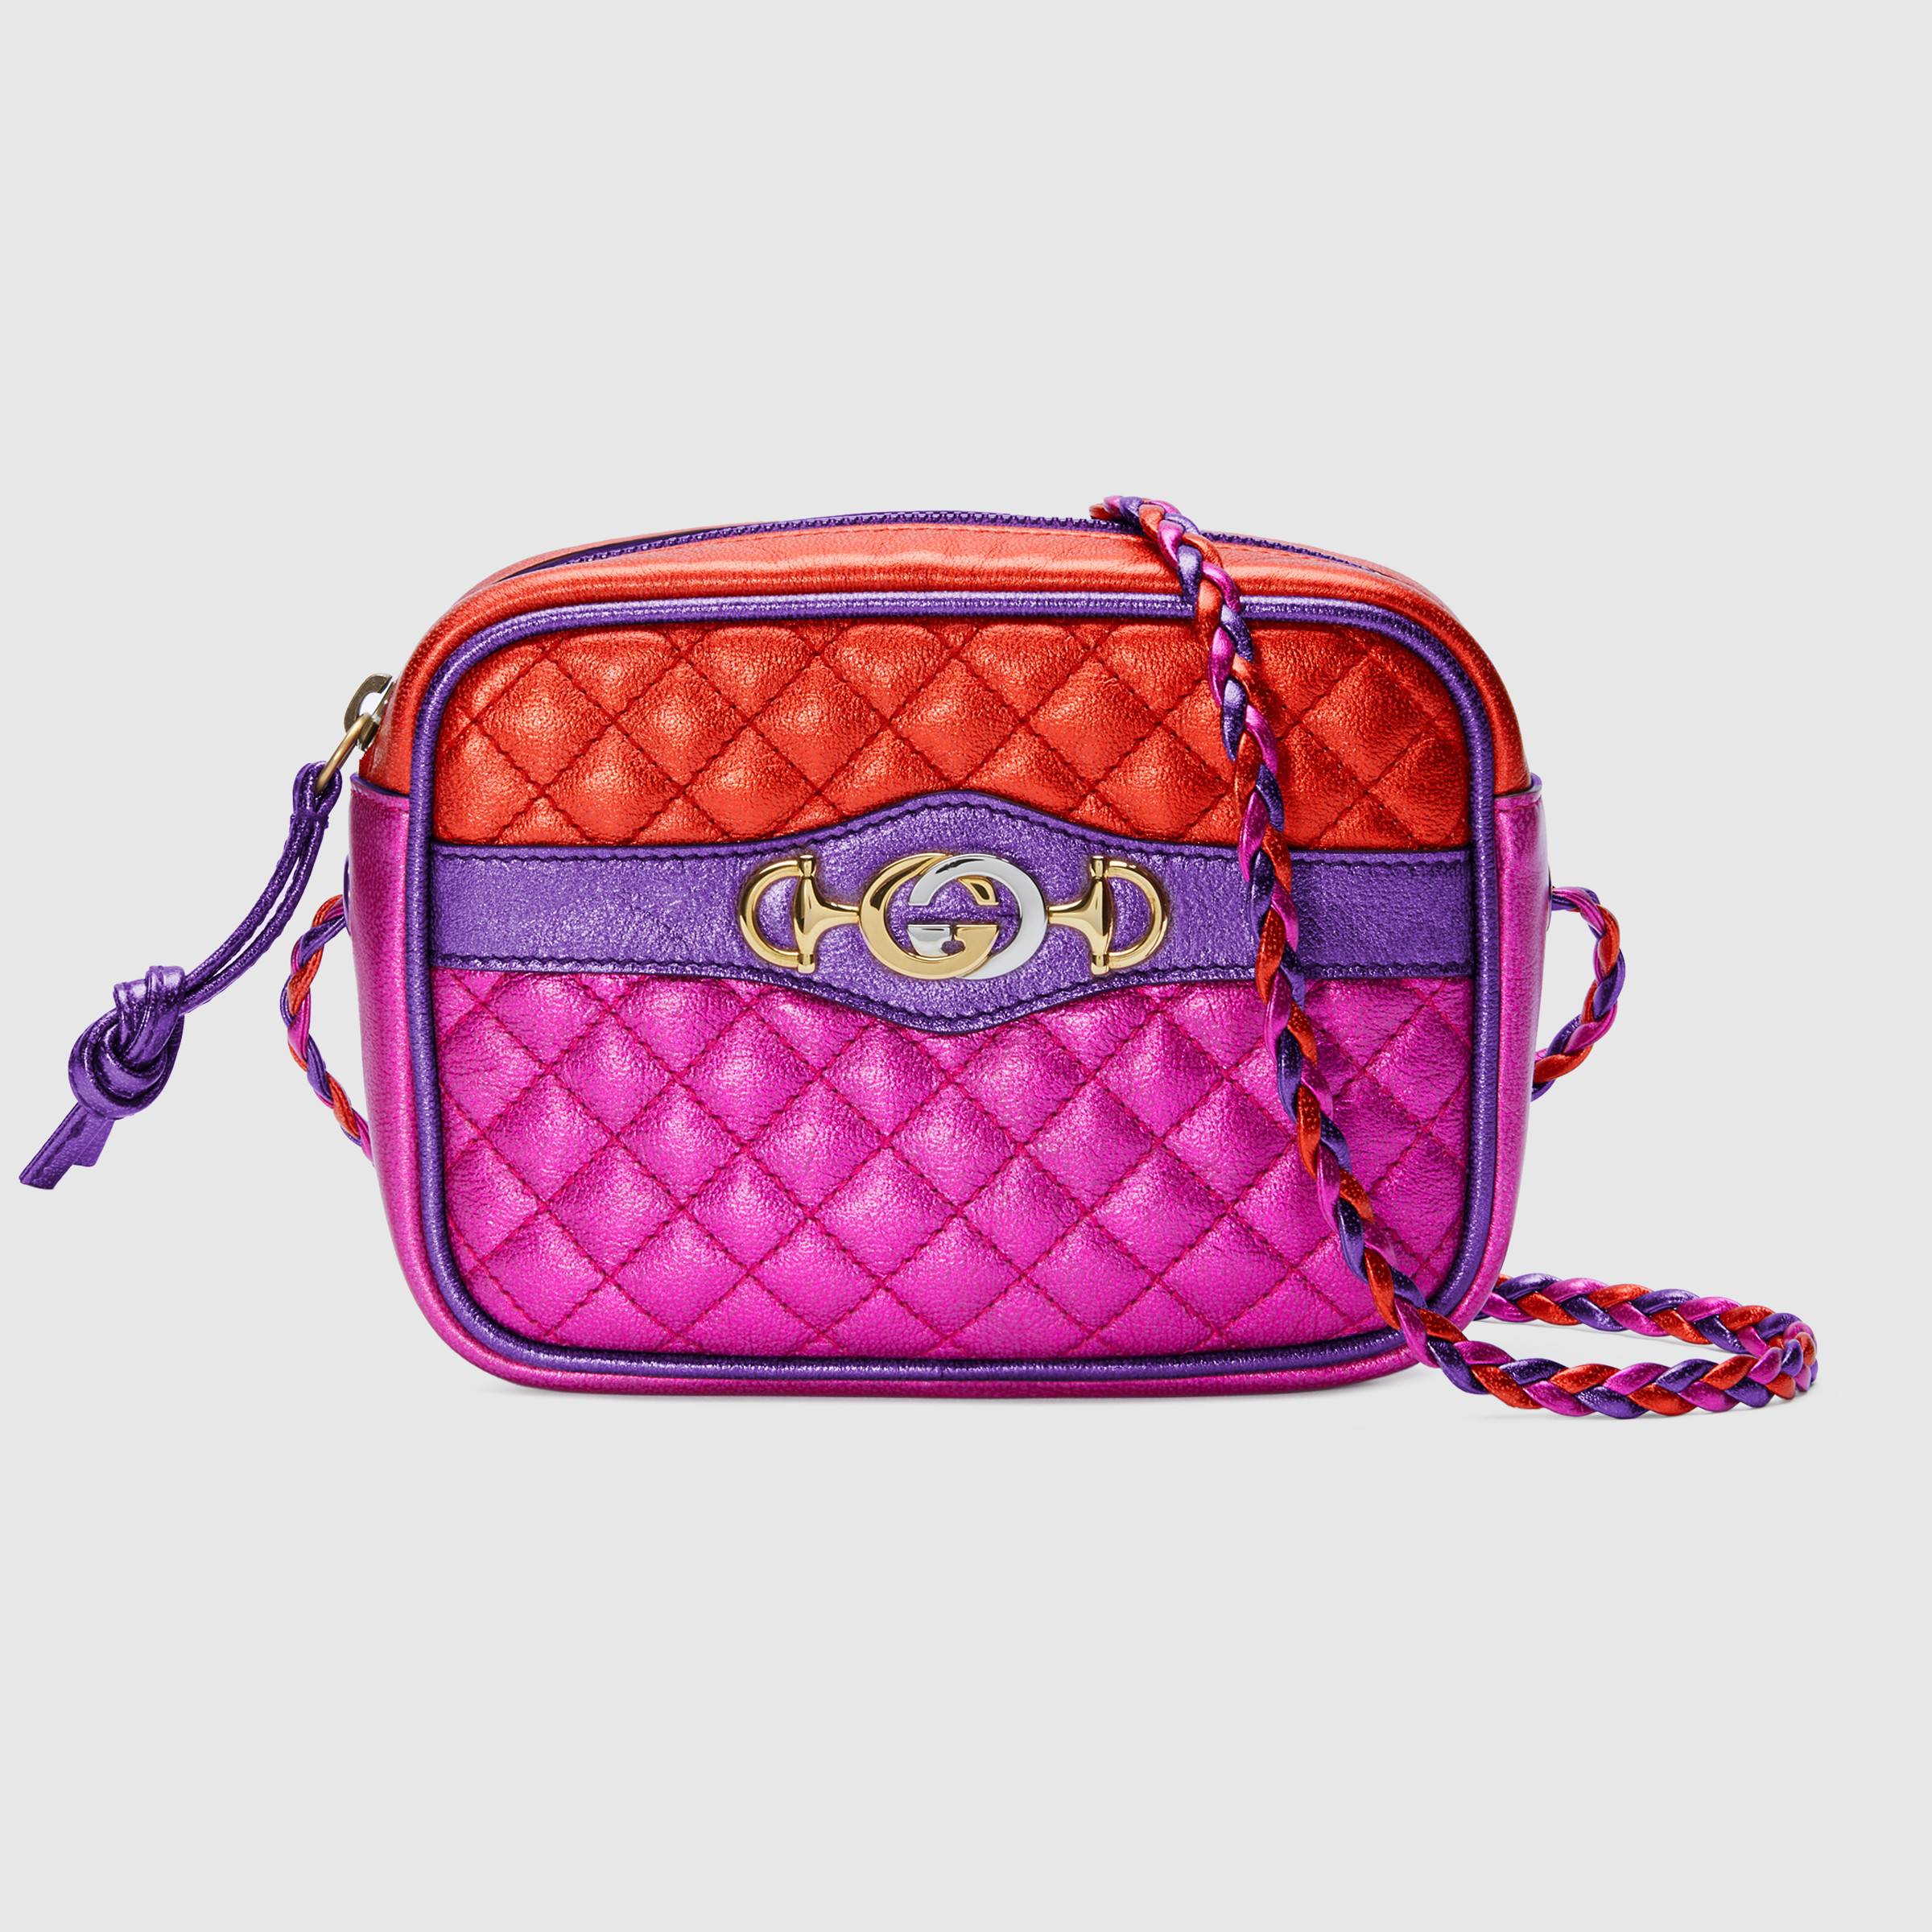 12 Must Have Gucci Bags For 2019 - FORD LA FEMME